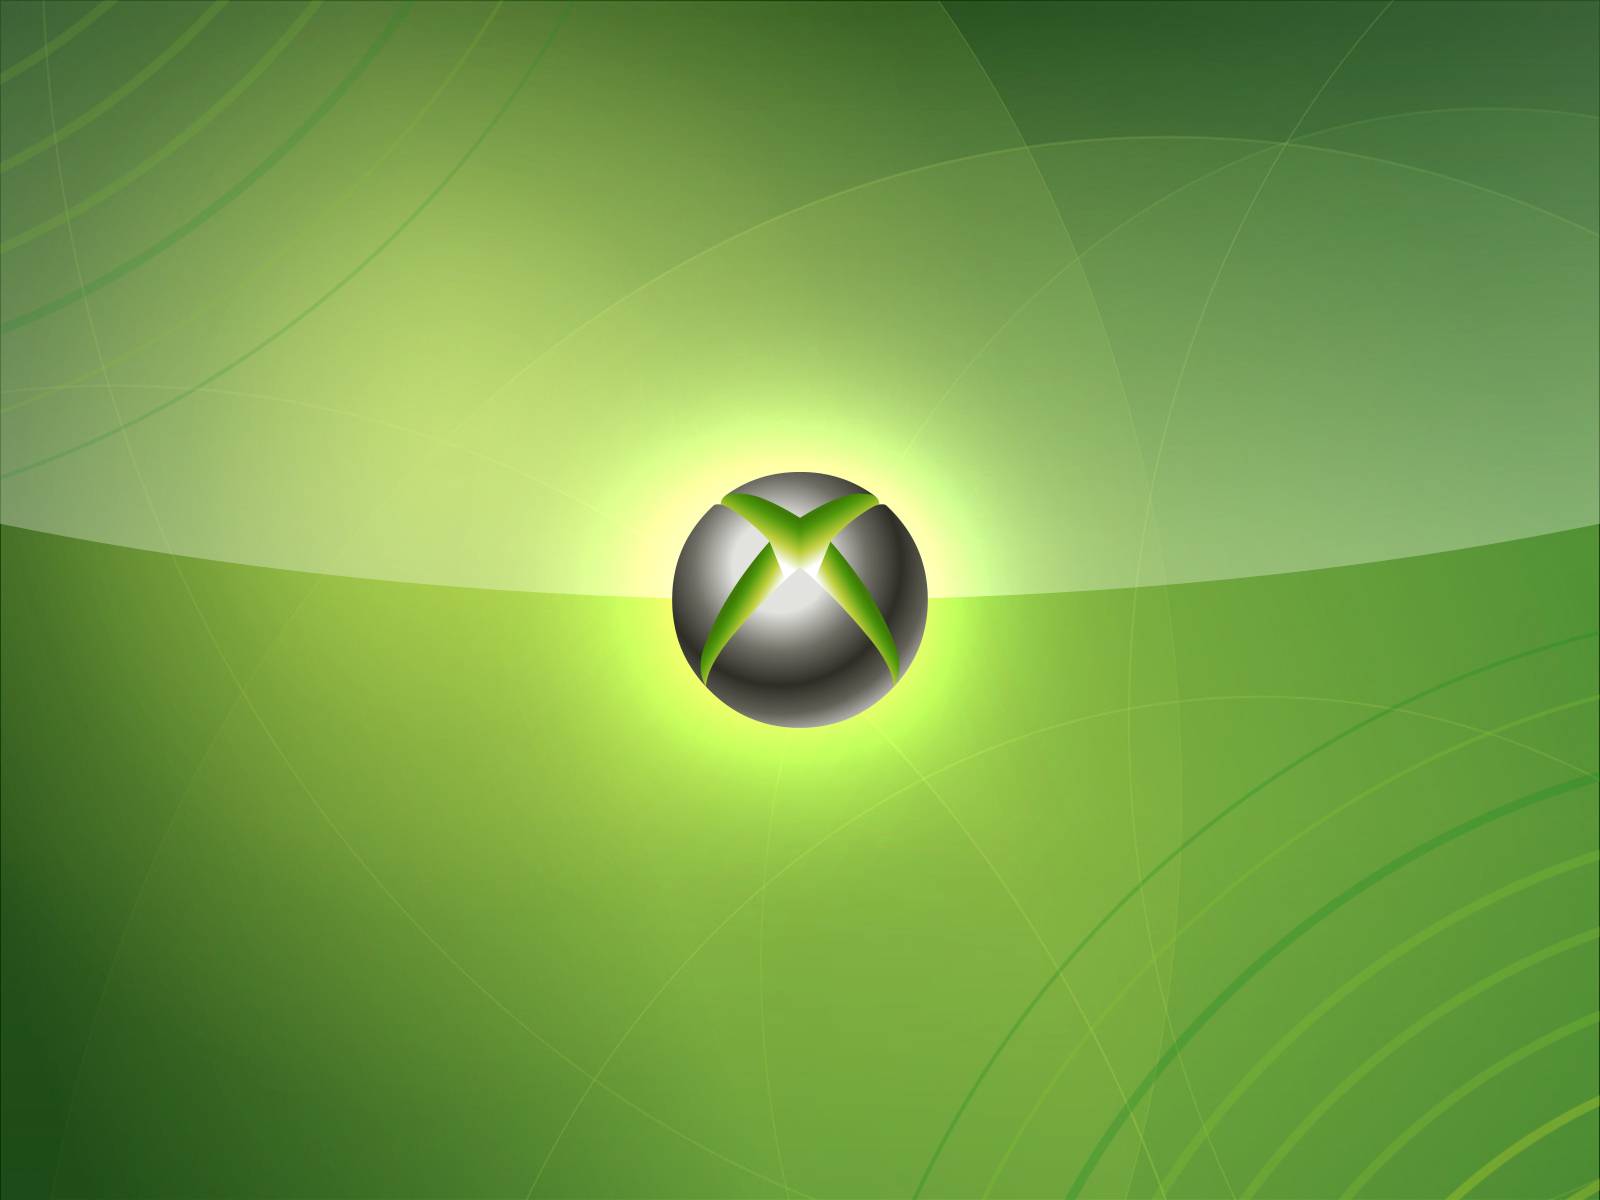 Xbox Iphone Wallpapers